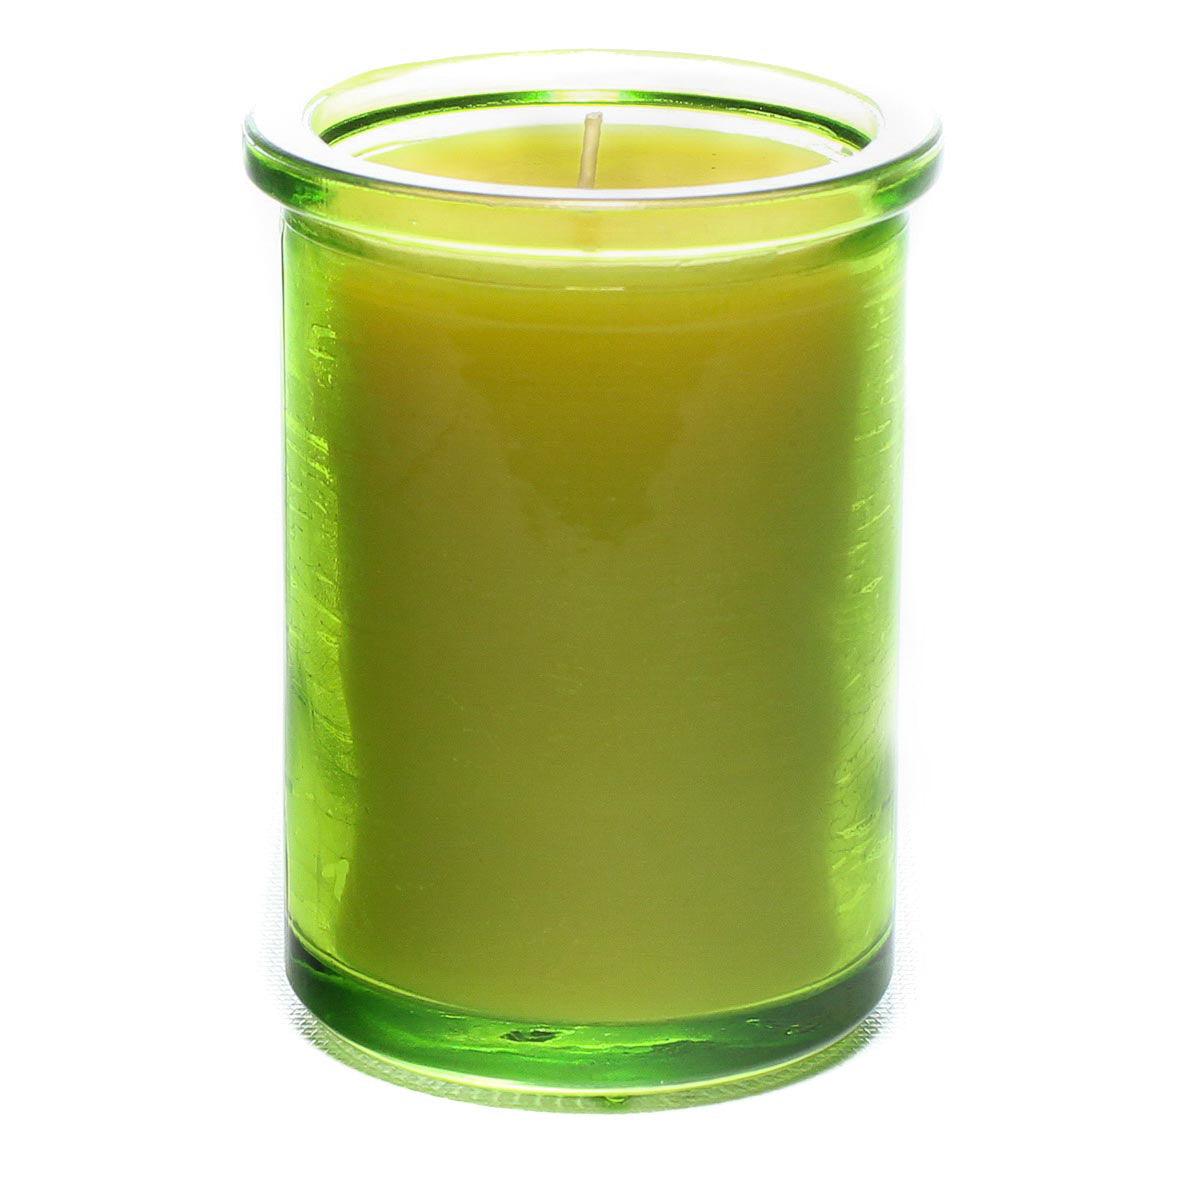 Bluecorn Beeswax 100% Pure Beeswax Lime 6oz Glass Candle. Burn Time: 35 hours. Wax is golden in color with a light honey scent. Made with 100% Pure Beeswax and a 100% pure cotton wick, no lead. Candles are paraffin free, clean burning and non-toxic. Features 6oz candle with Bluecorn Beeswax hang tag printed on white 100% recyled paper with gold foil. For best burn, burn candle until wax pool reaches glass wall and trim wick to 1/4 before lighting.